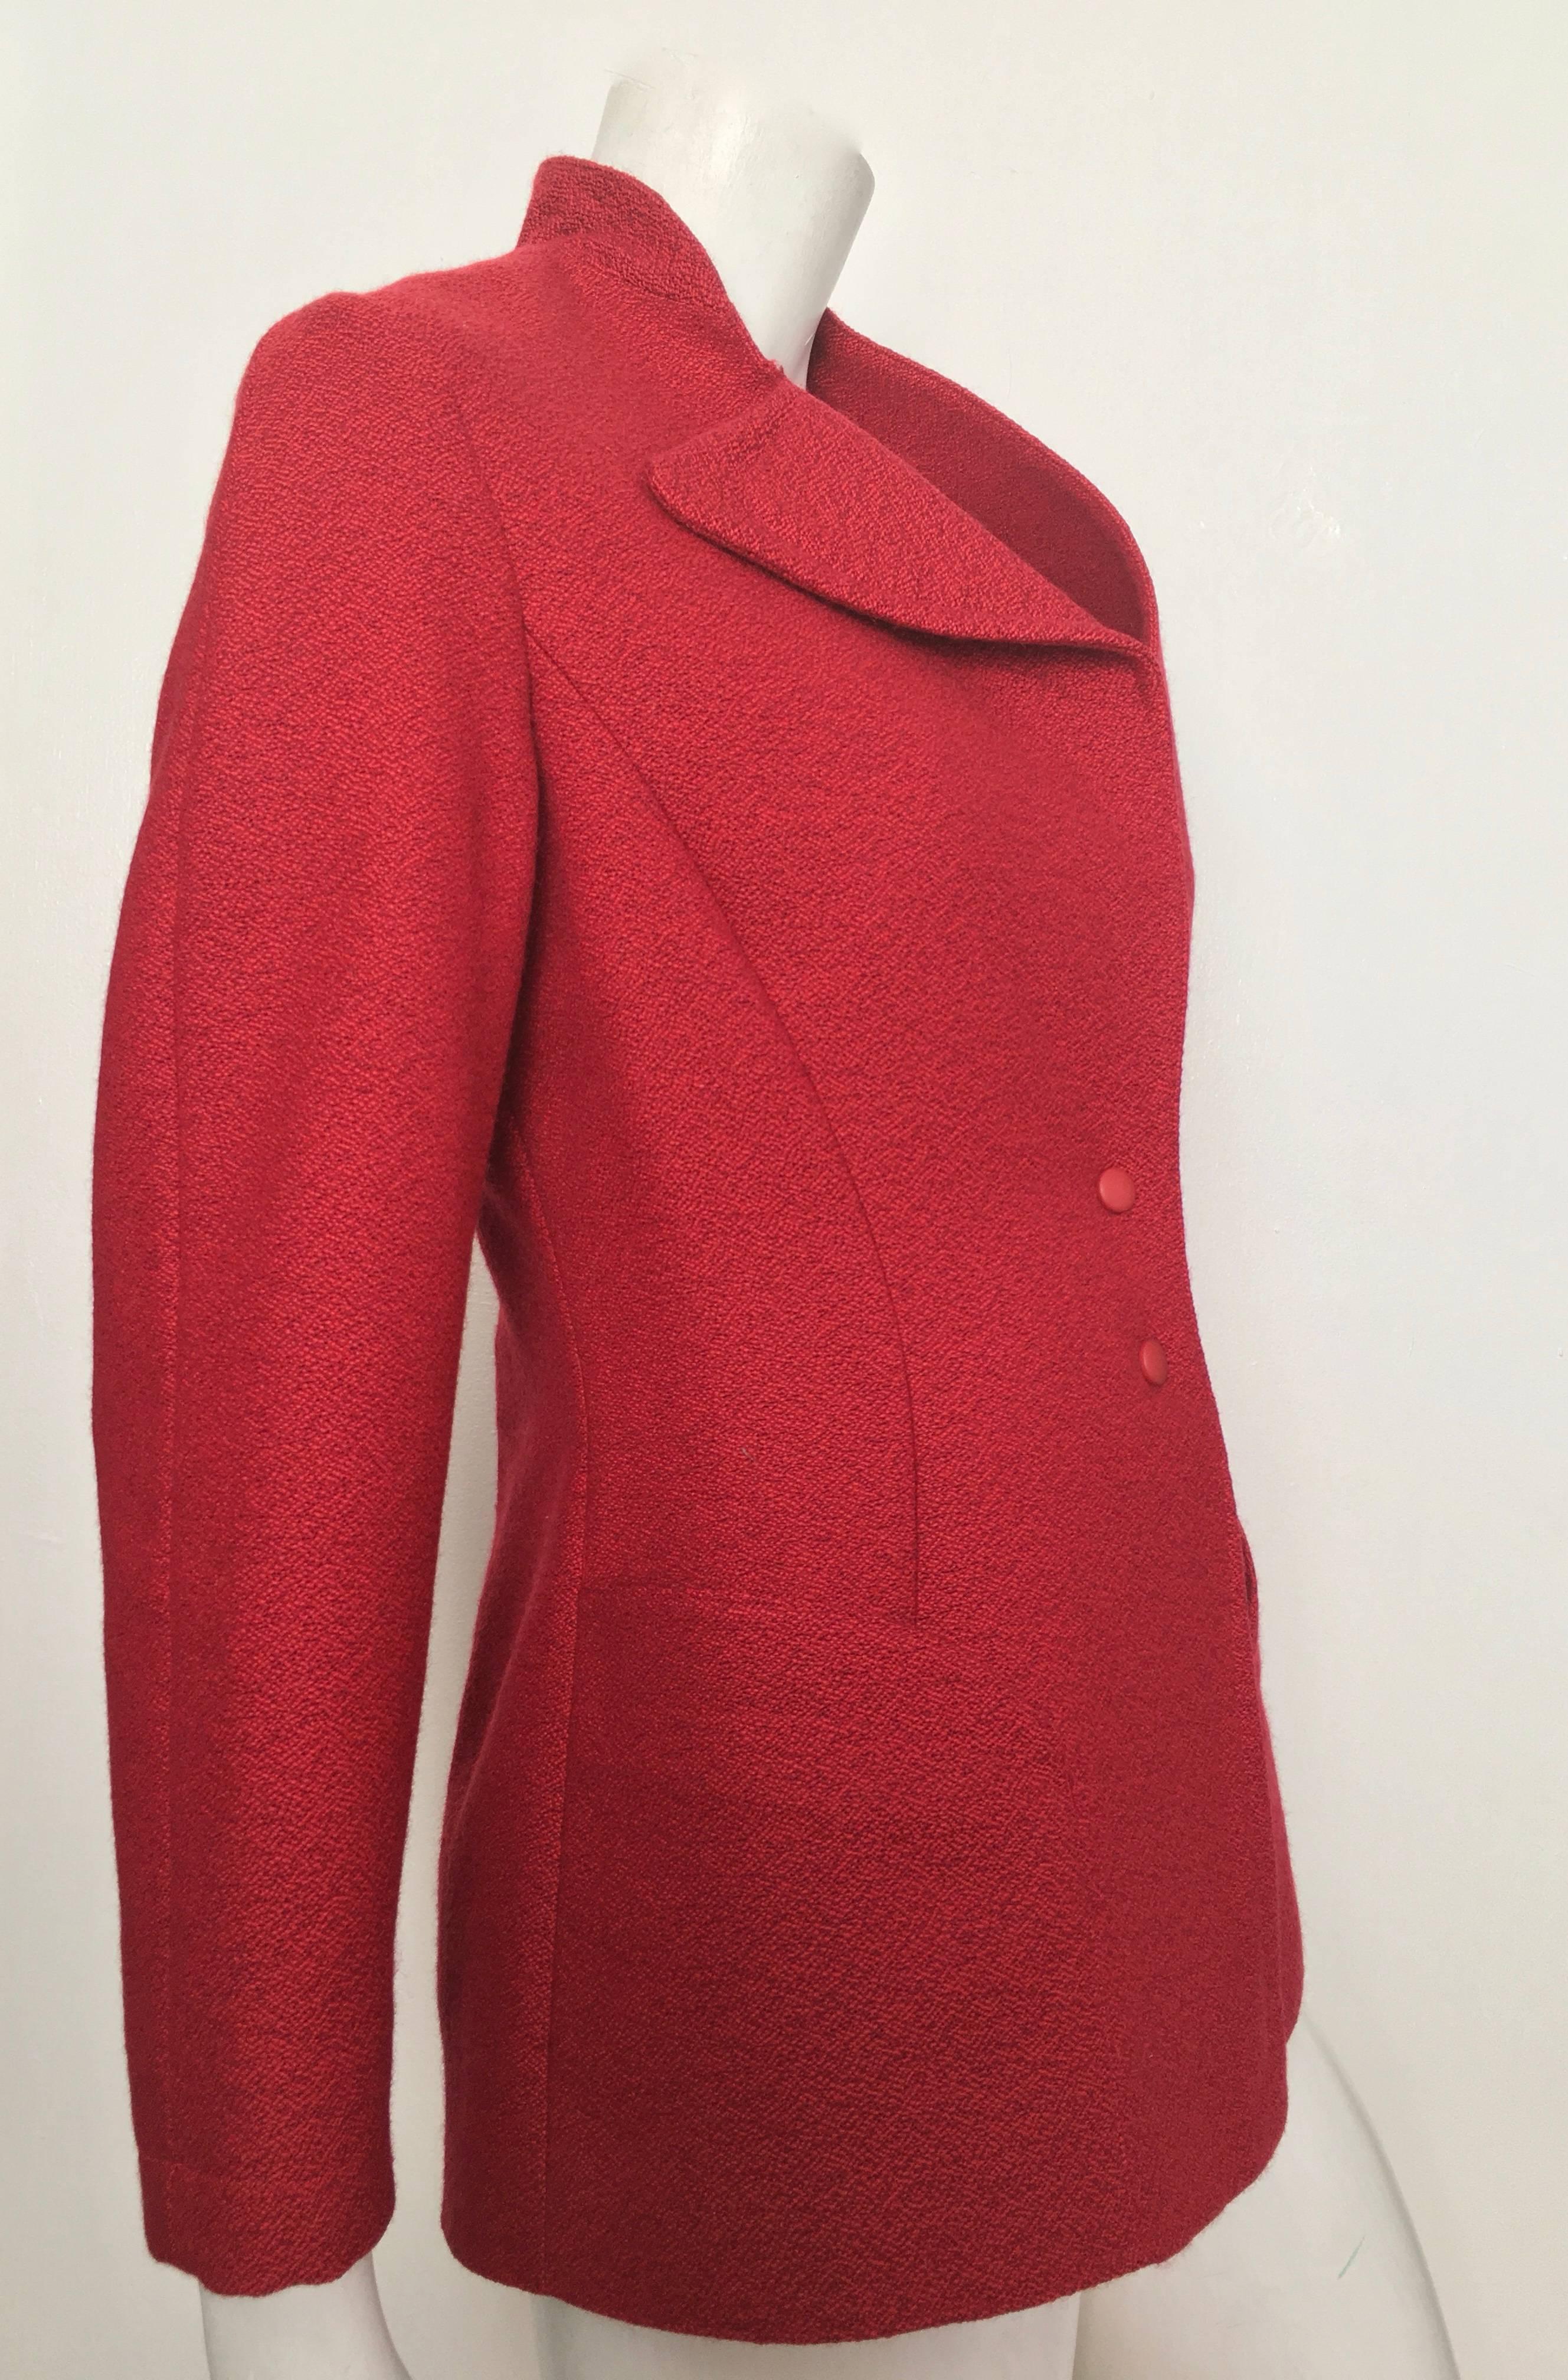 Thierry Mugler 1990s red wool sculptural snap button jacket with pockets will fit a size 8. Curved front pockets with singular lapel jacket is a great example of this infamous French fashion designer's vision. This sexy & stylish jacket is just as